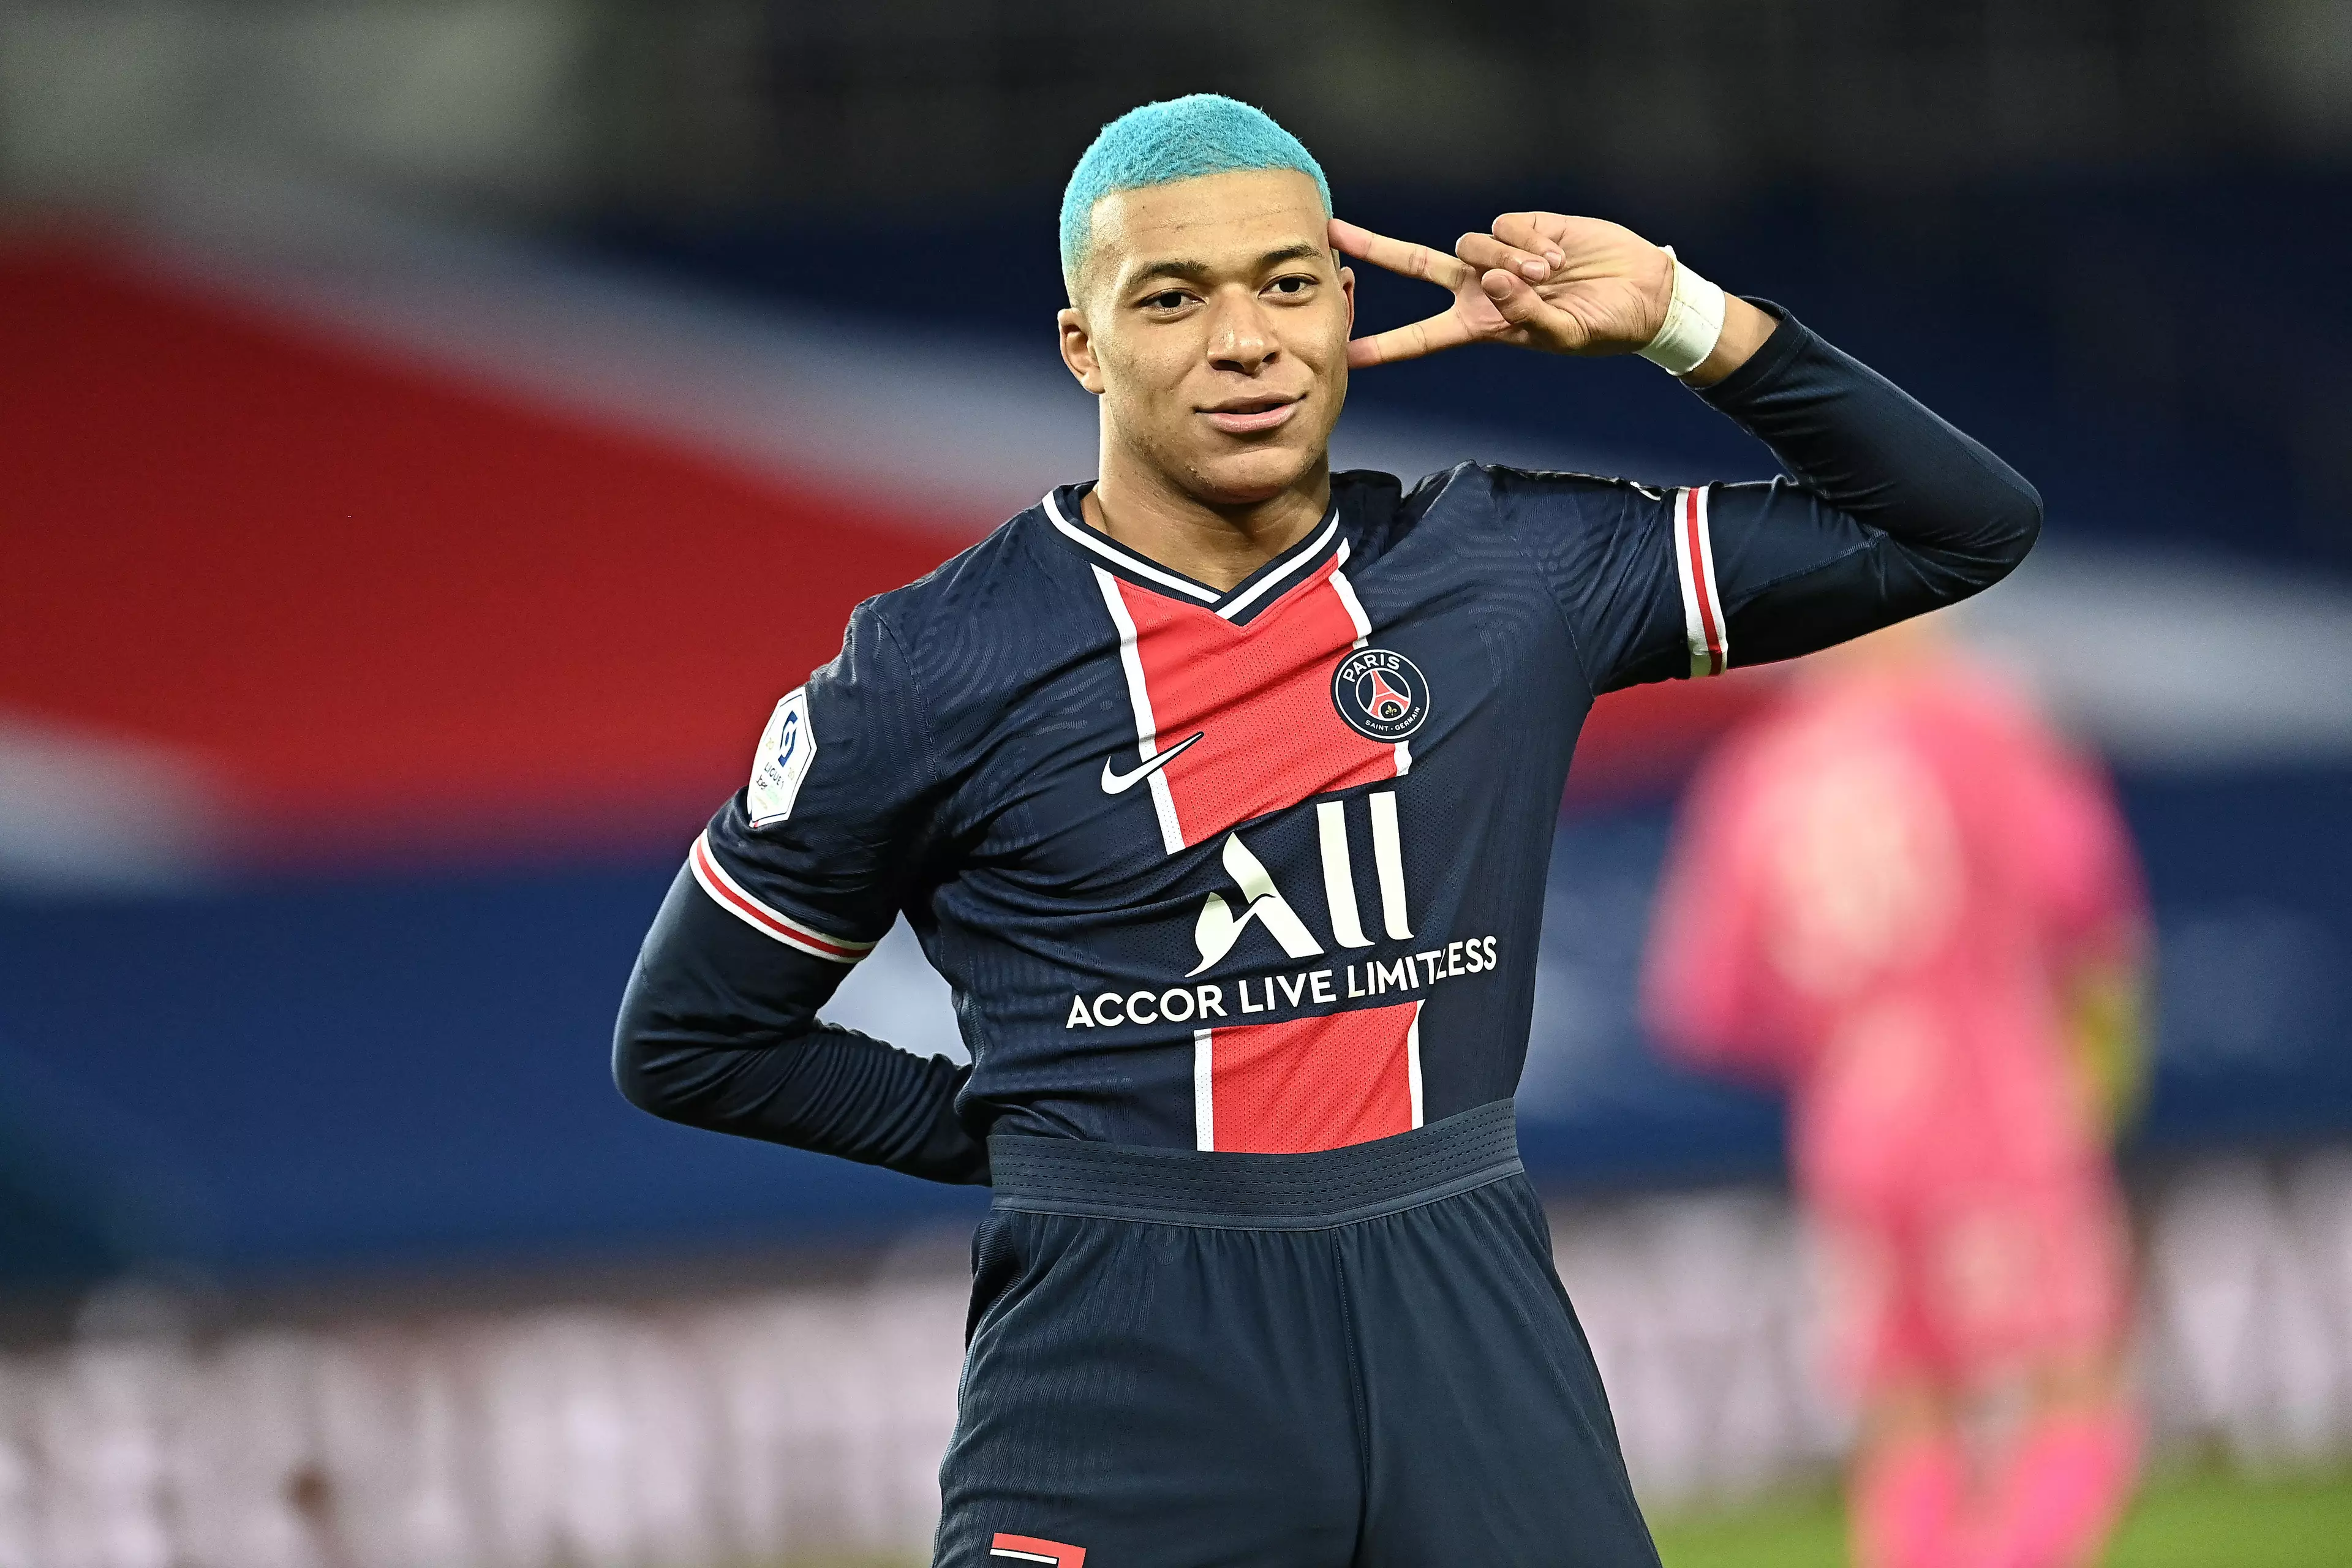 Mbappe would be a huge signing for Real. Image: PA Images